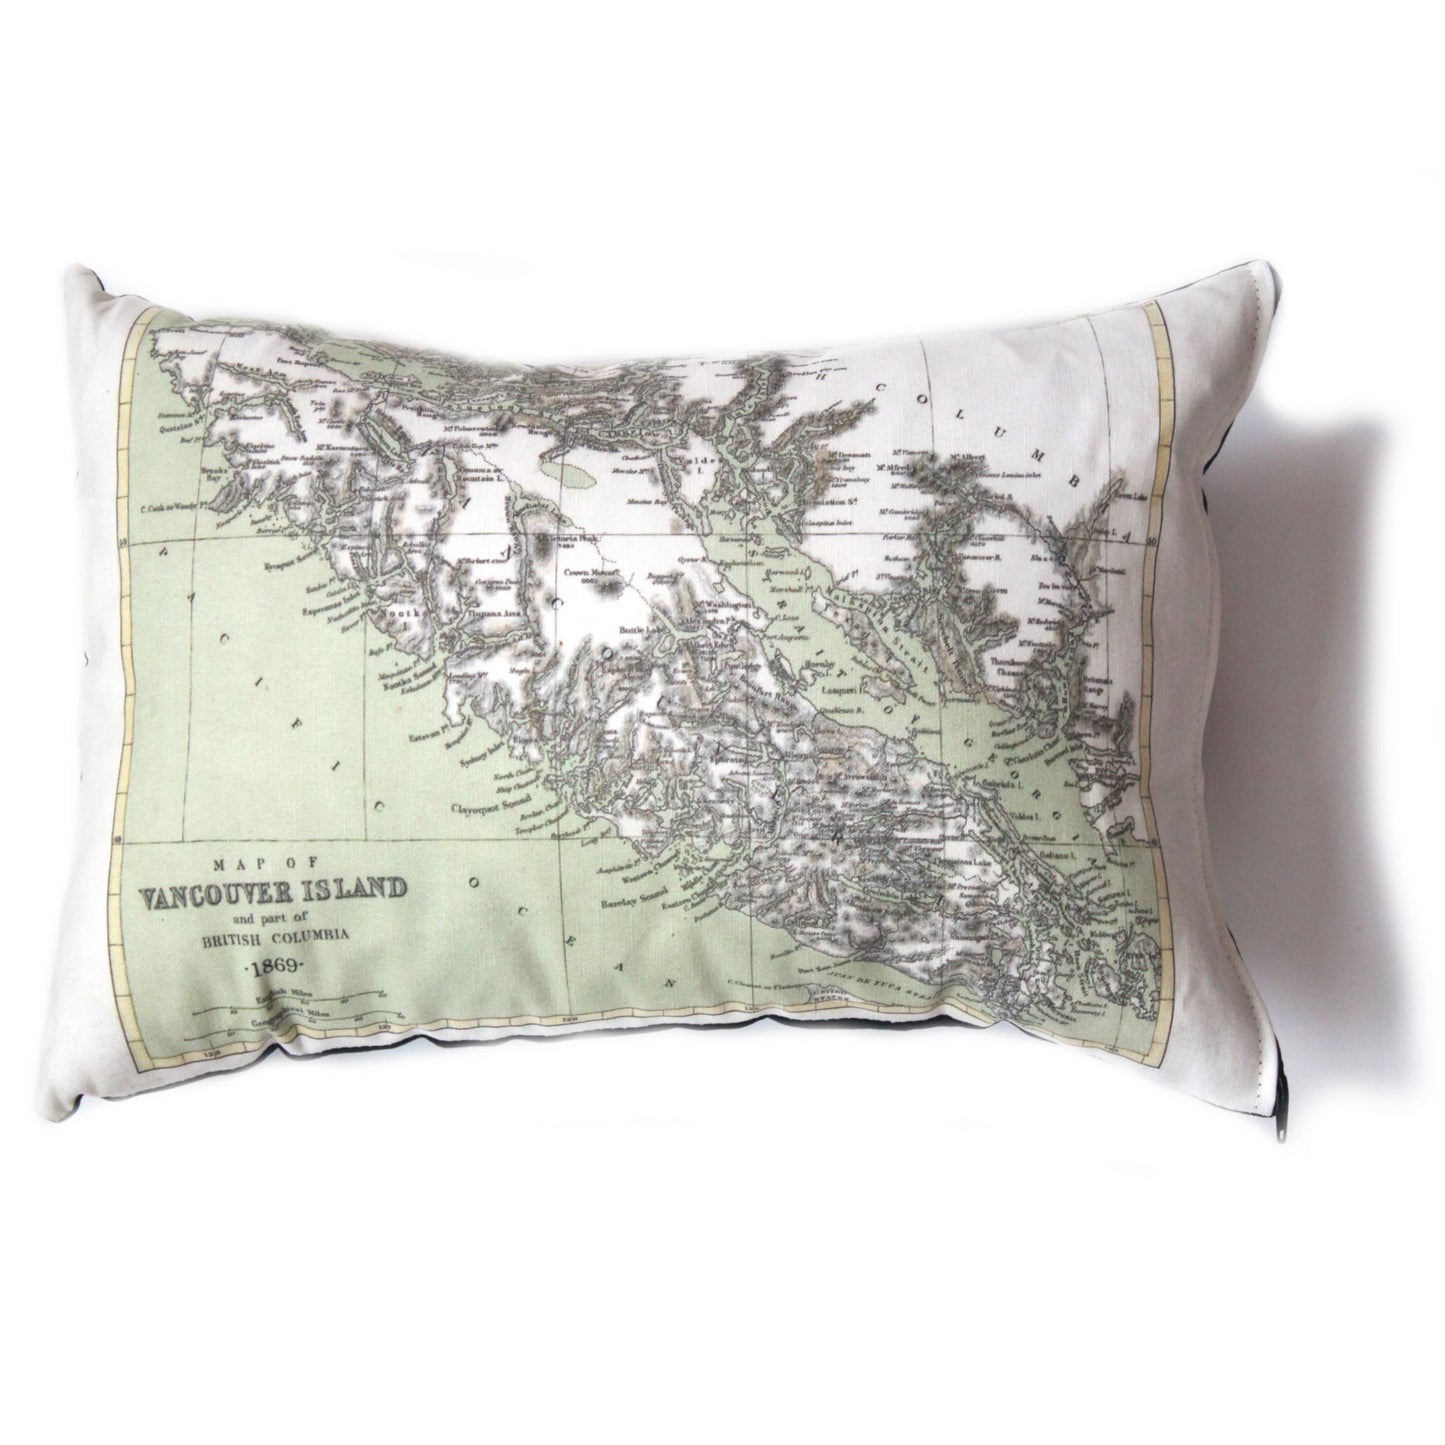 Made in Canada linen pillow case with hand printed vintage map of Vancouver Island in British Columbia, BC.